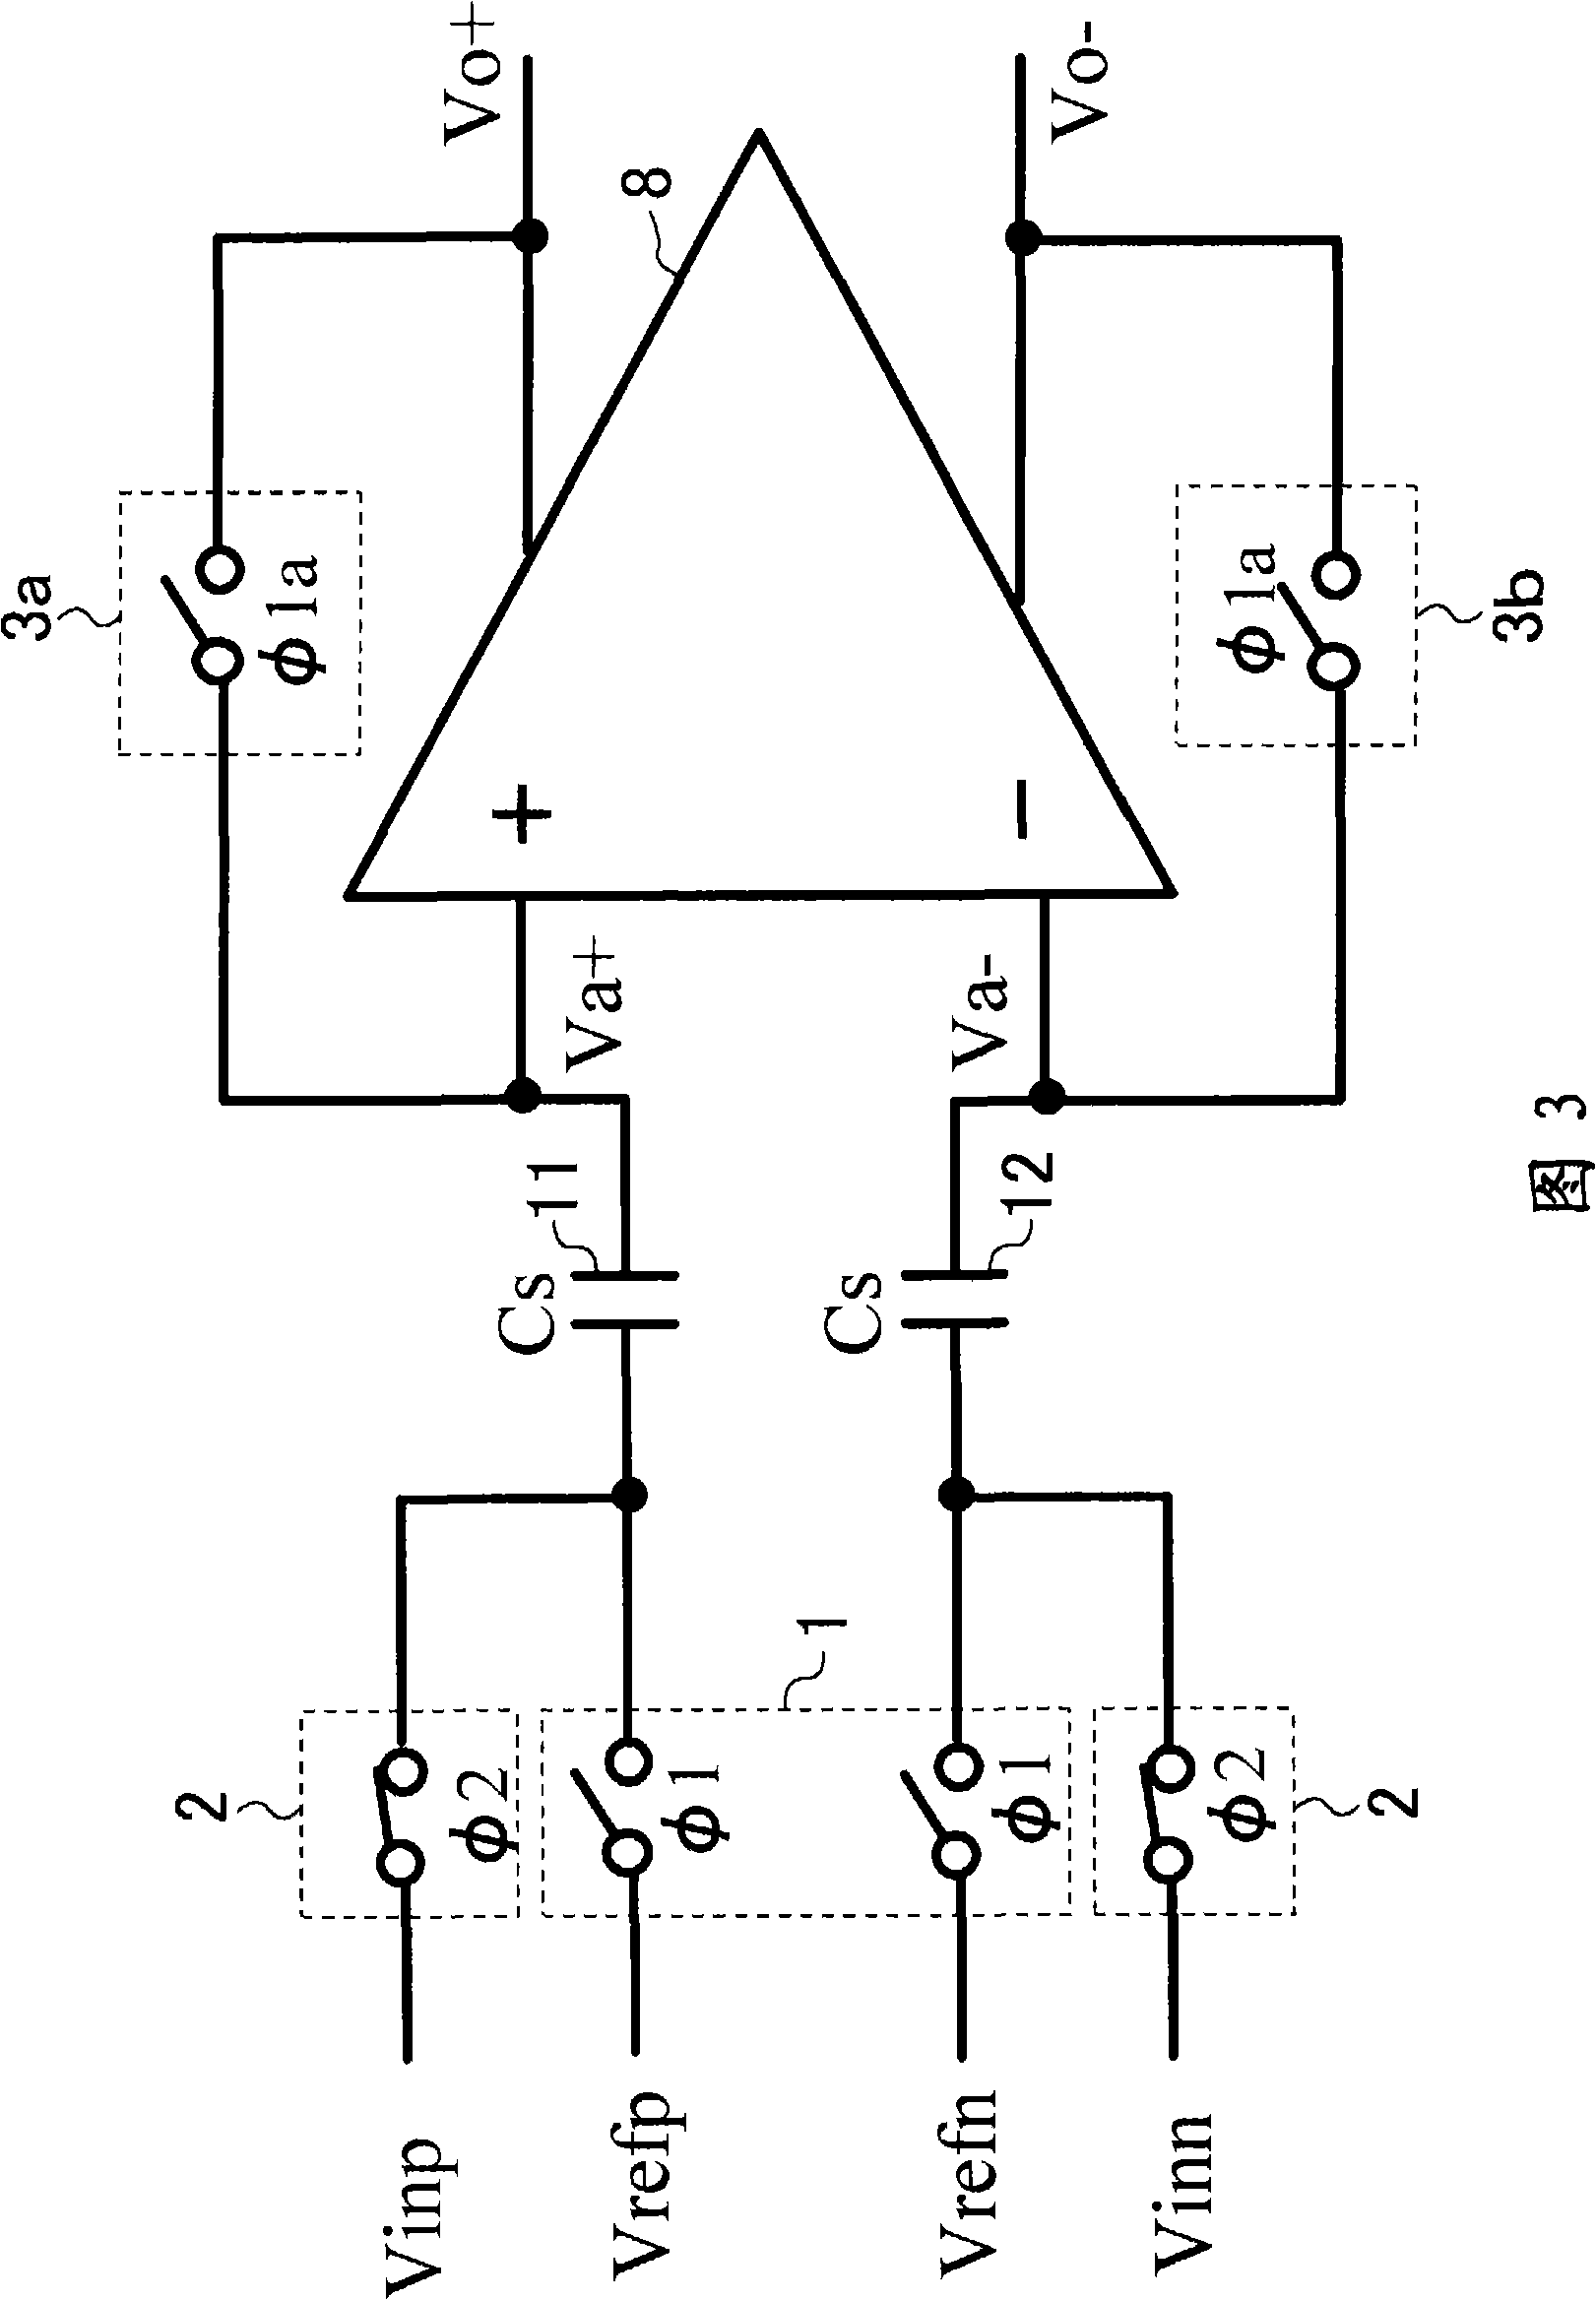 Fully differential comparator and fully differential amplifier